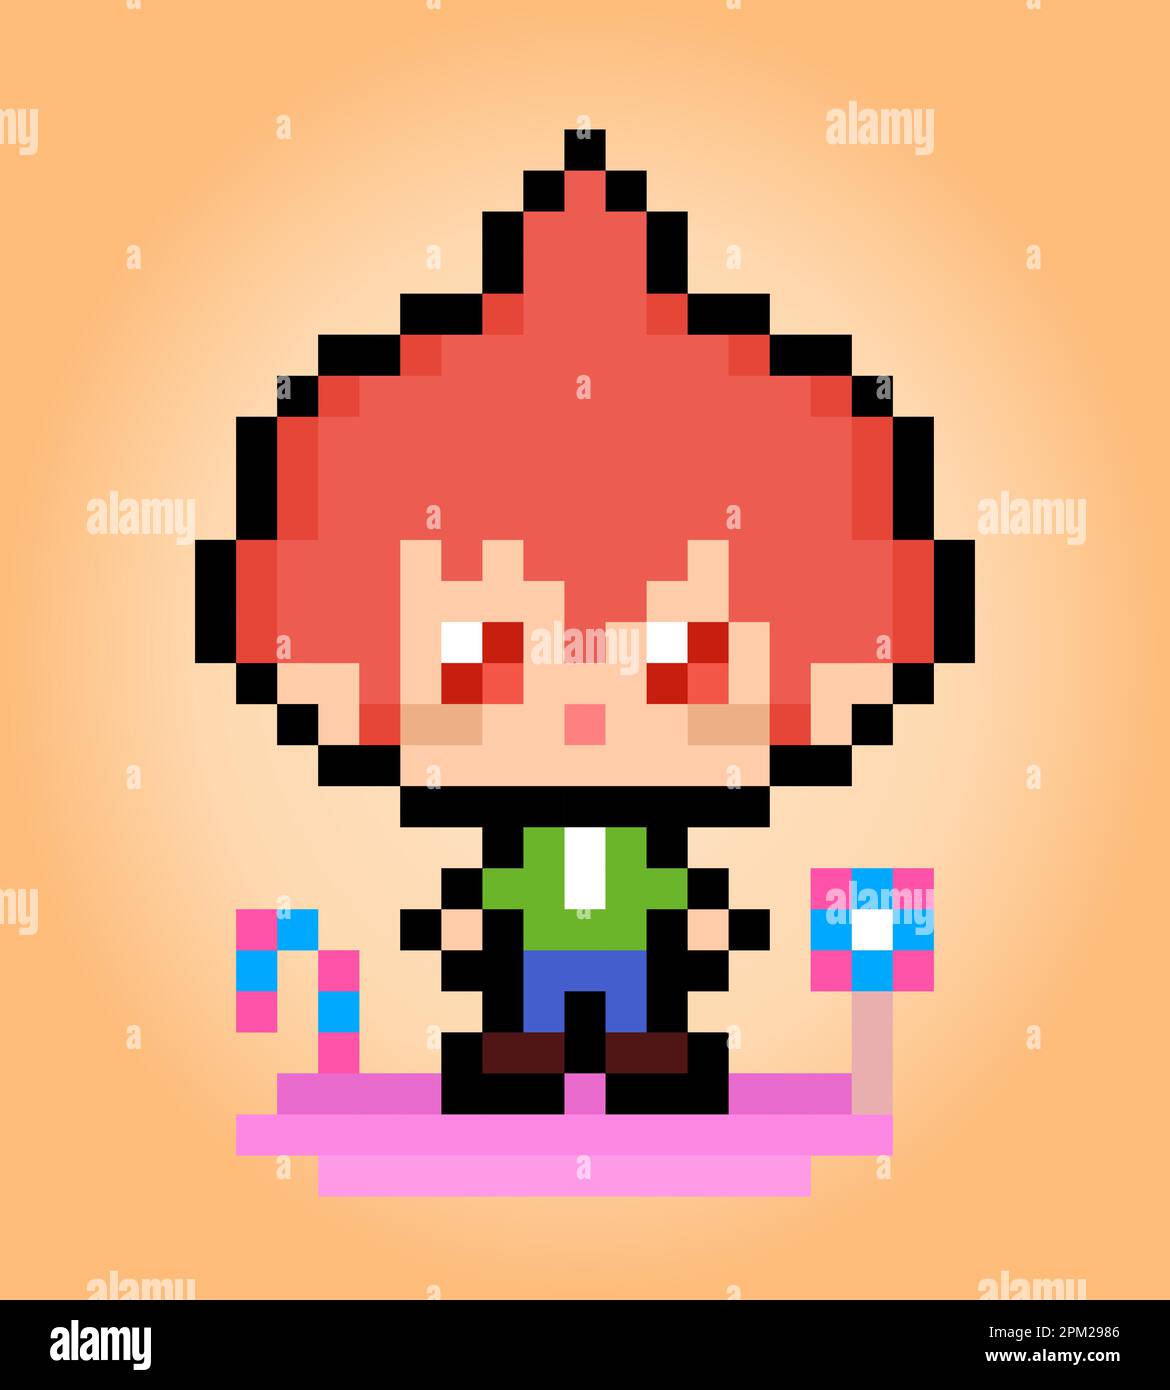 8 bit Pixel of the hero character. Human pixels in vector illustration for game assets or cross stitch pattern. Stock Vector